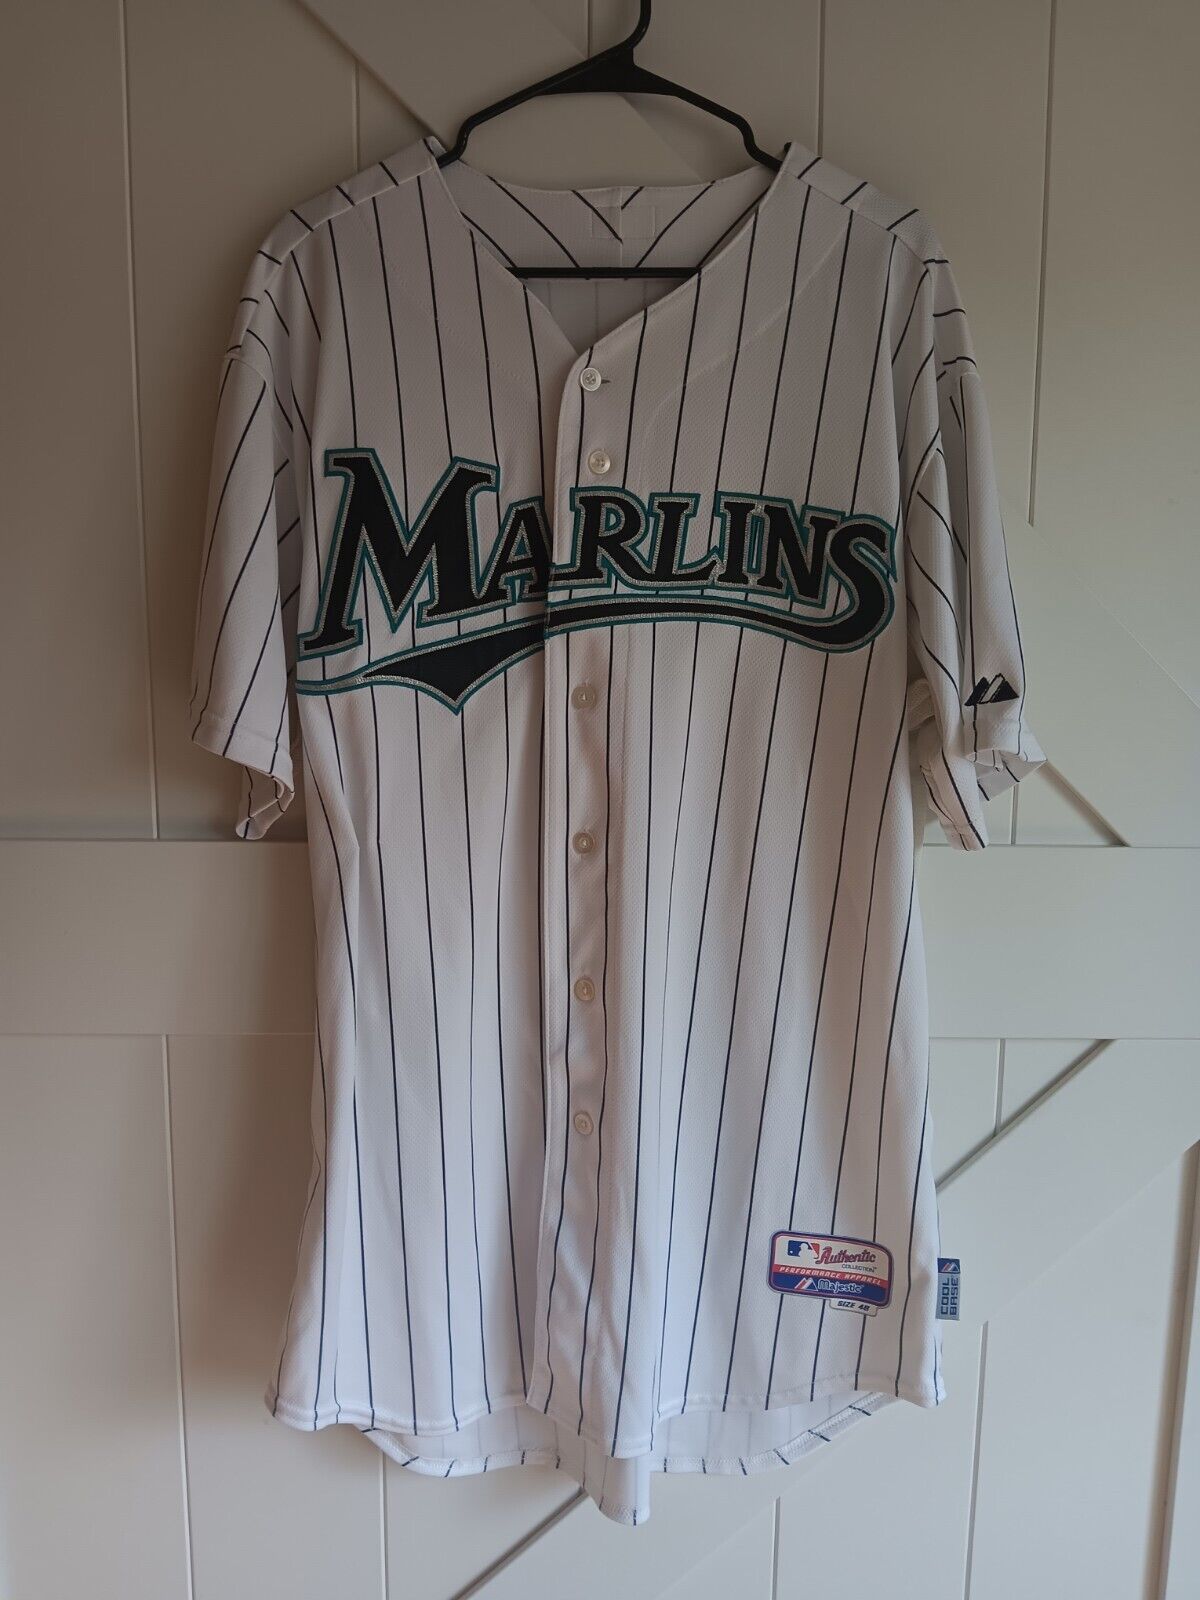 New Majestic Authentic Florida/Miami Marlins Blank Home Cool Base Jersey 48 XL